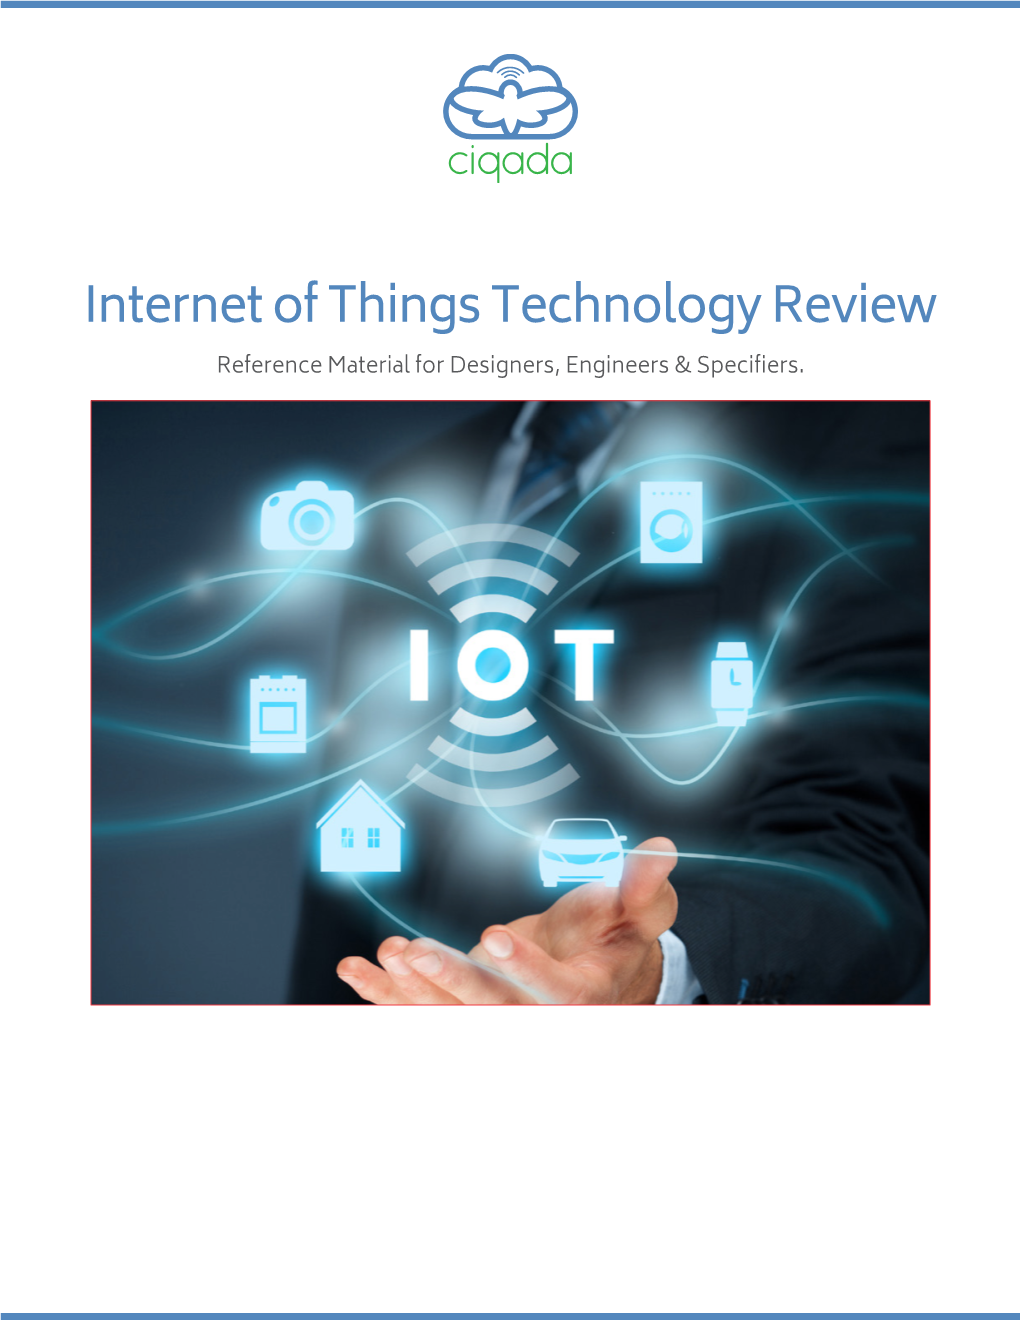 Internet of Things Technology Review Reference Material for Designers, Engineers & Specifiers